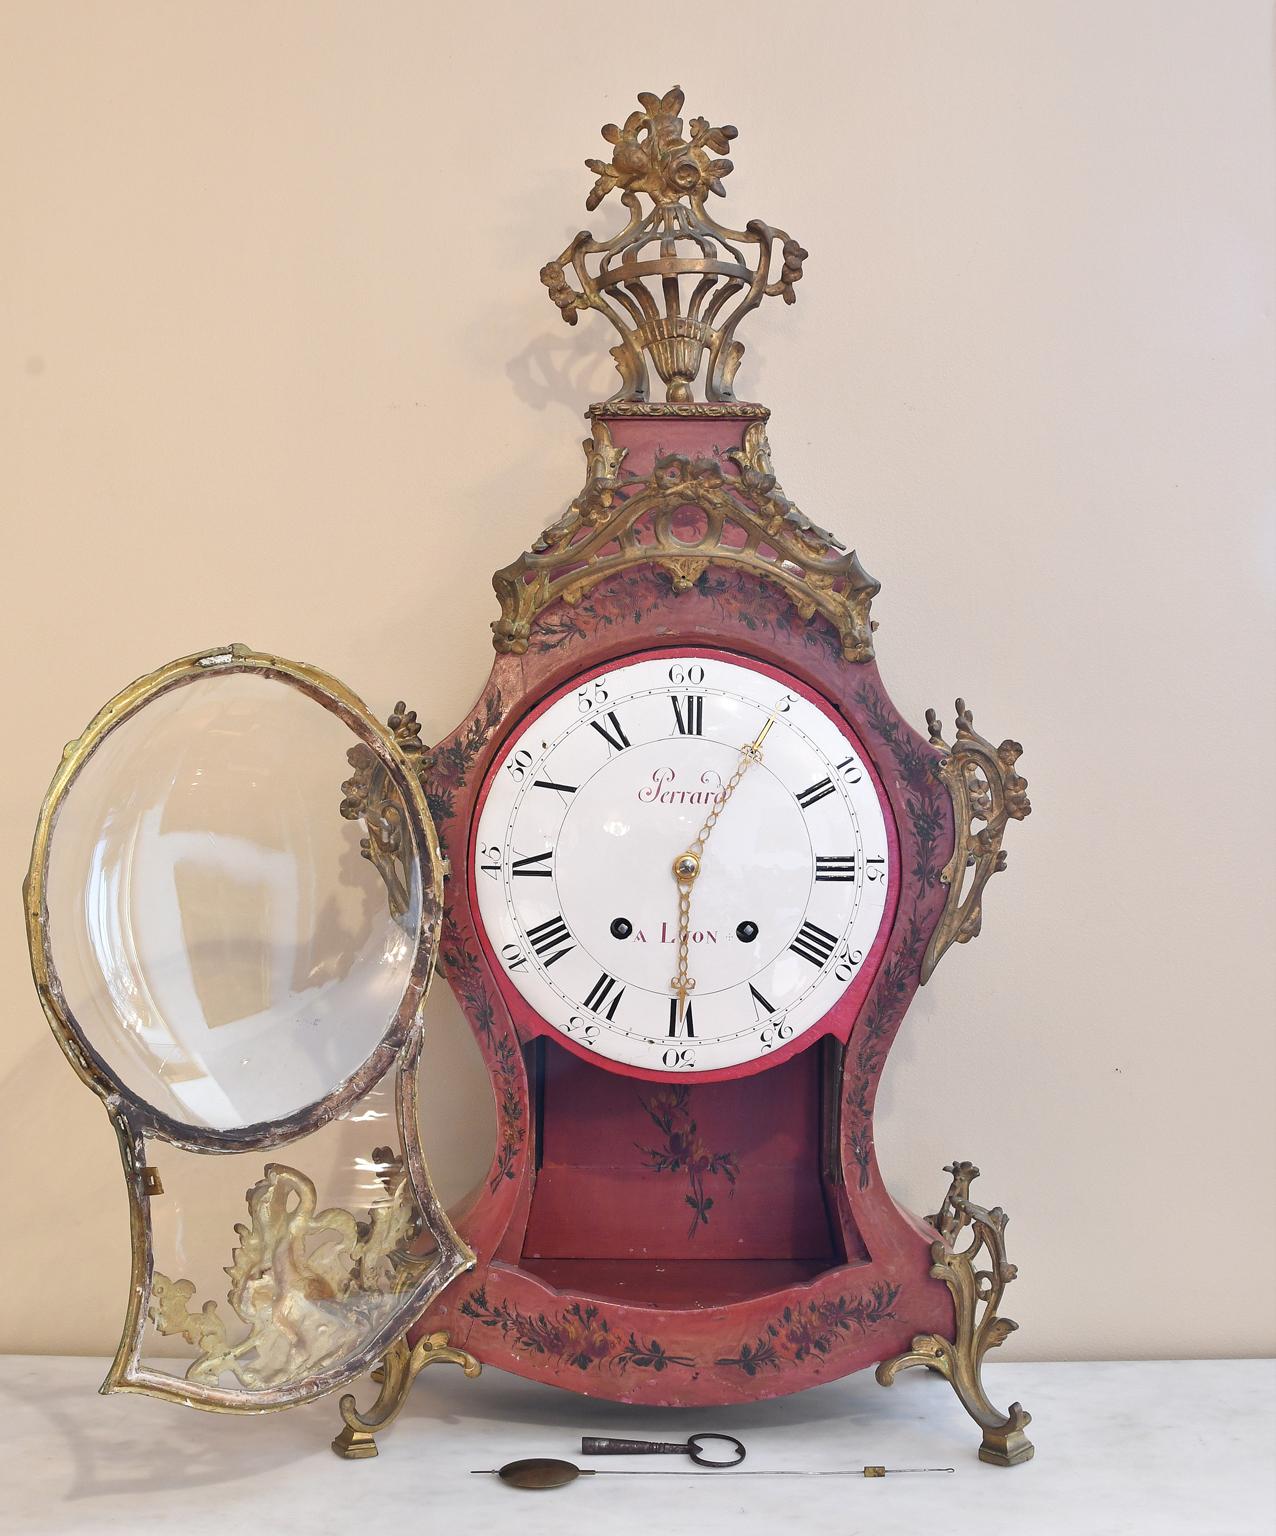 Rococo 18th Century French Louis XV Mantel Clock w/ Ormolu & Painted Flowers by Perrard For Sale